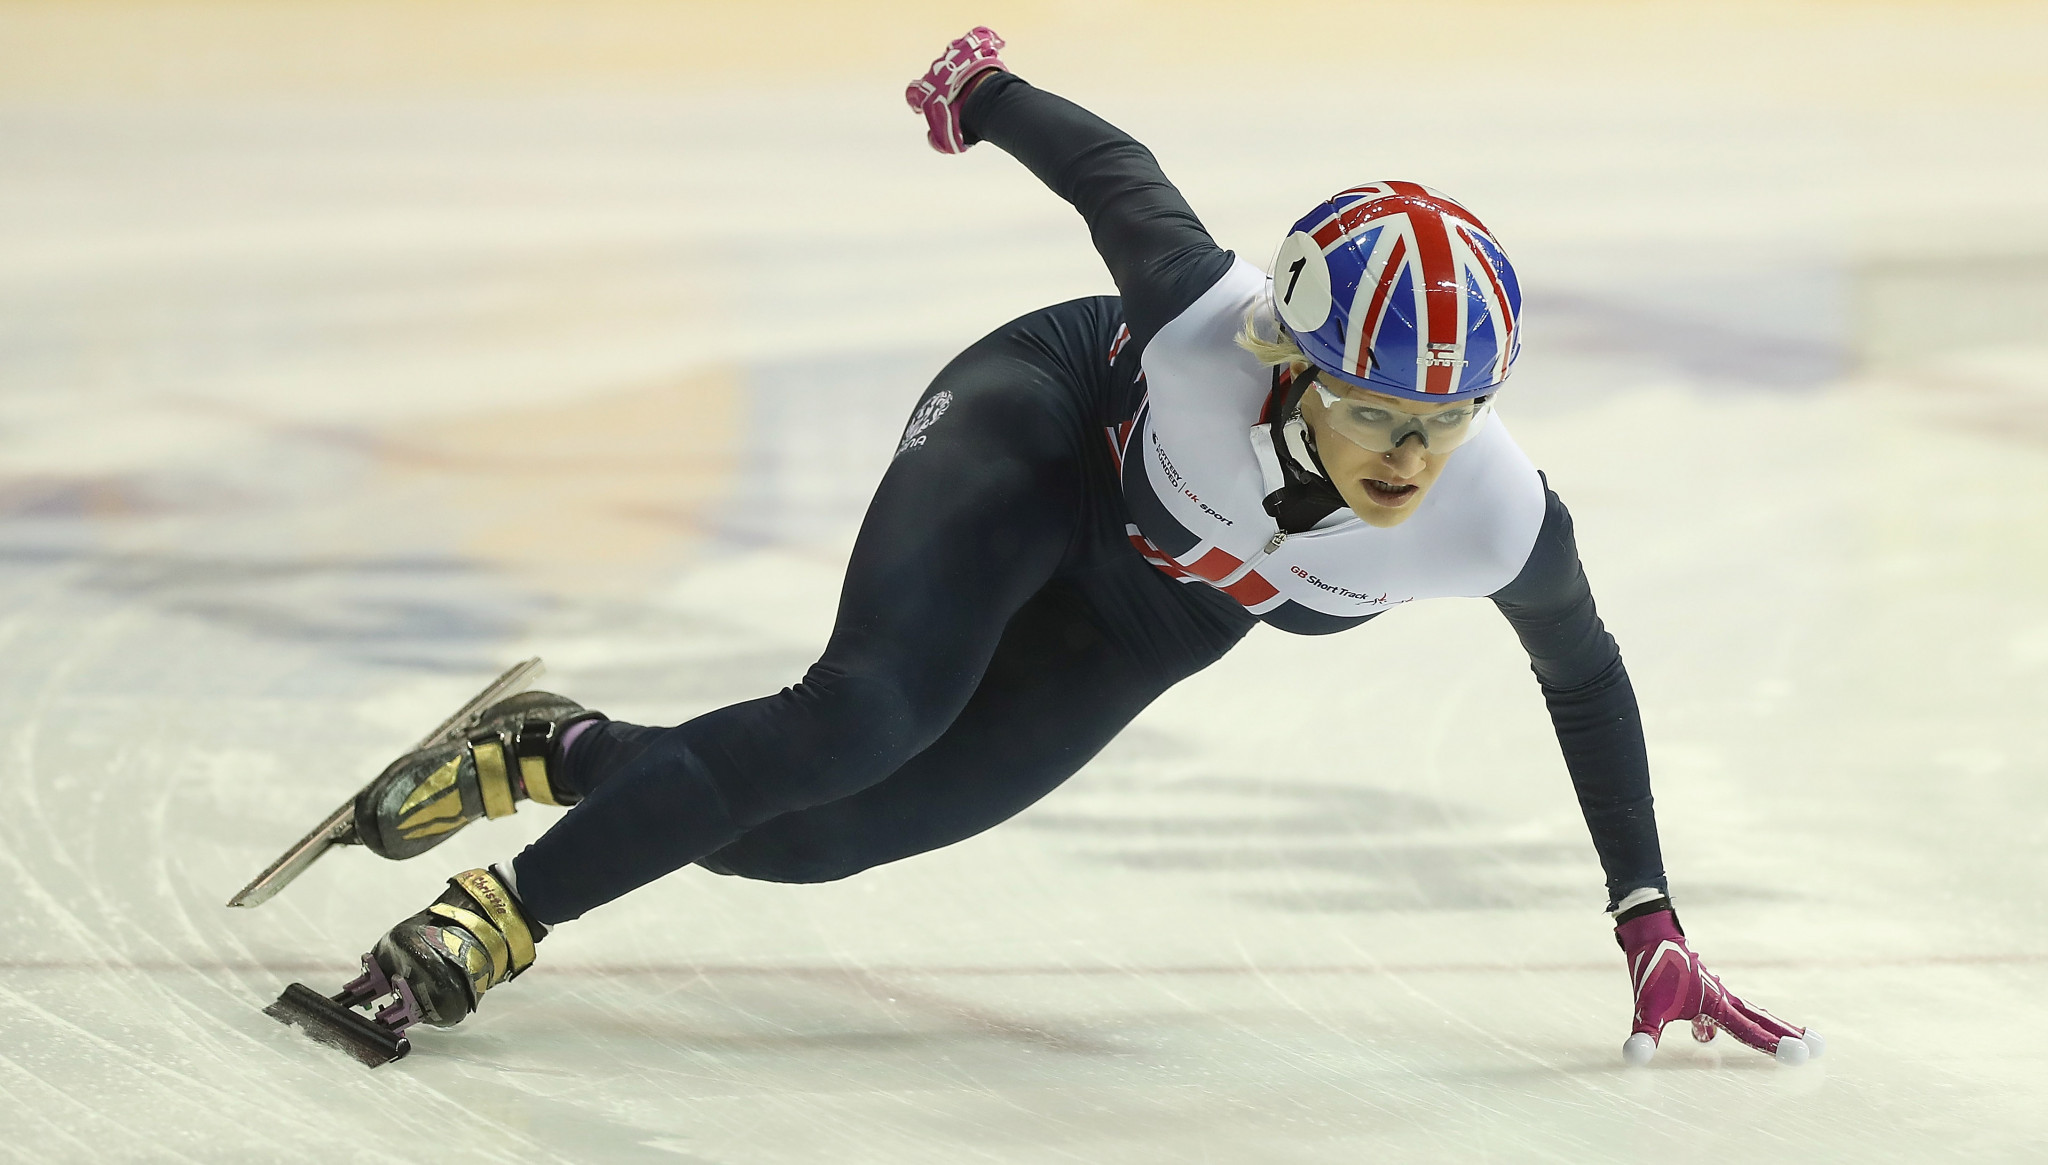 Christie to miss European Short Track Championships as injury recovery continues